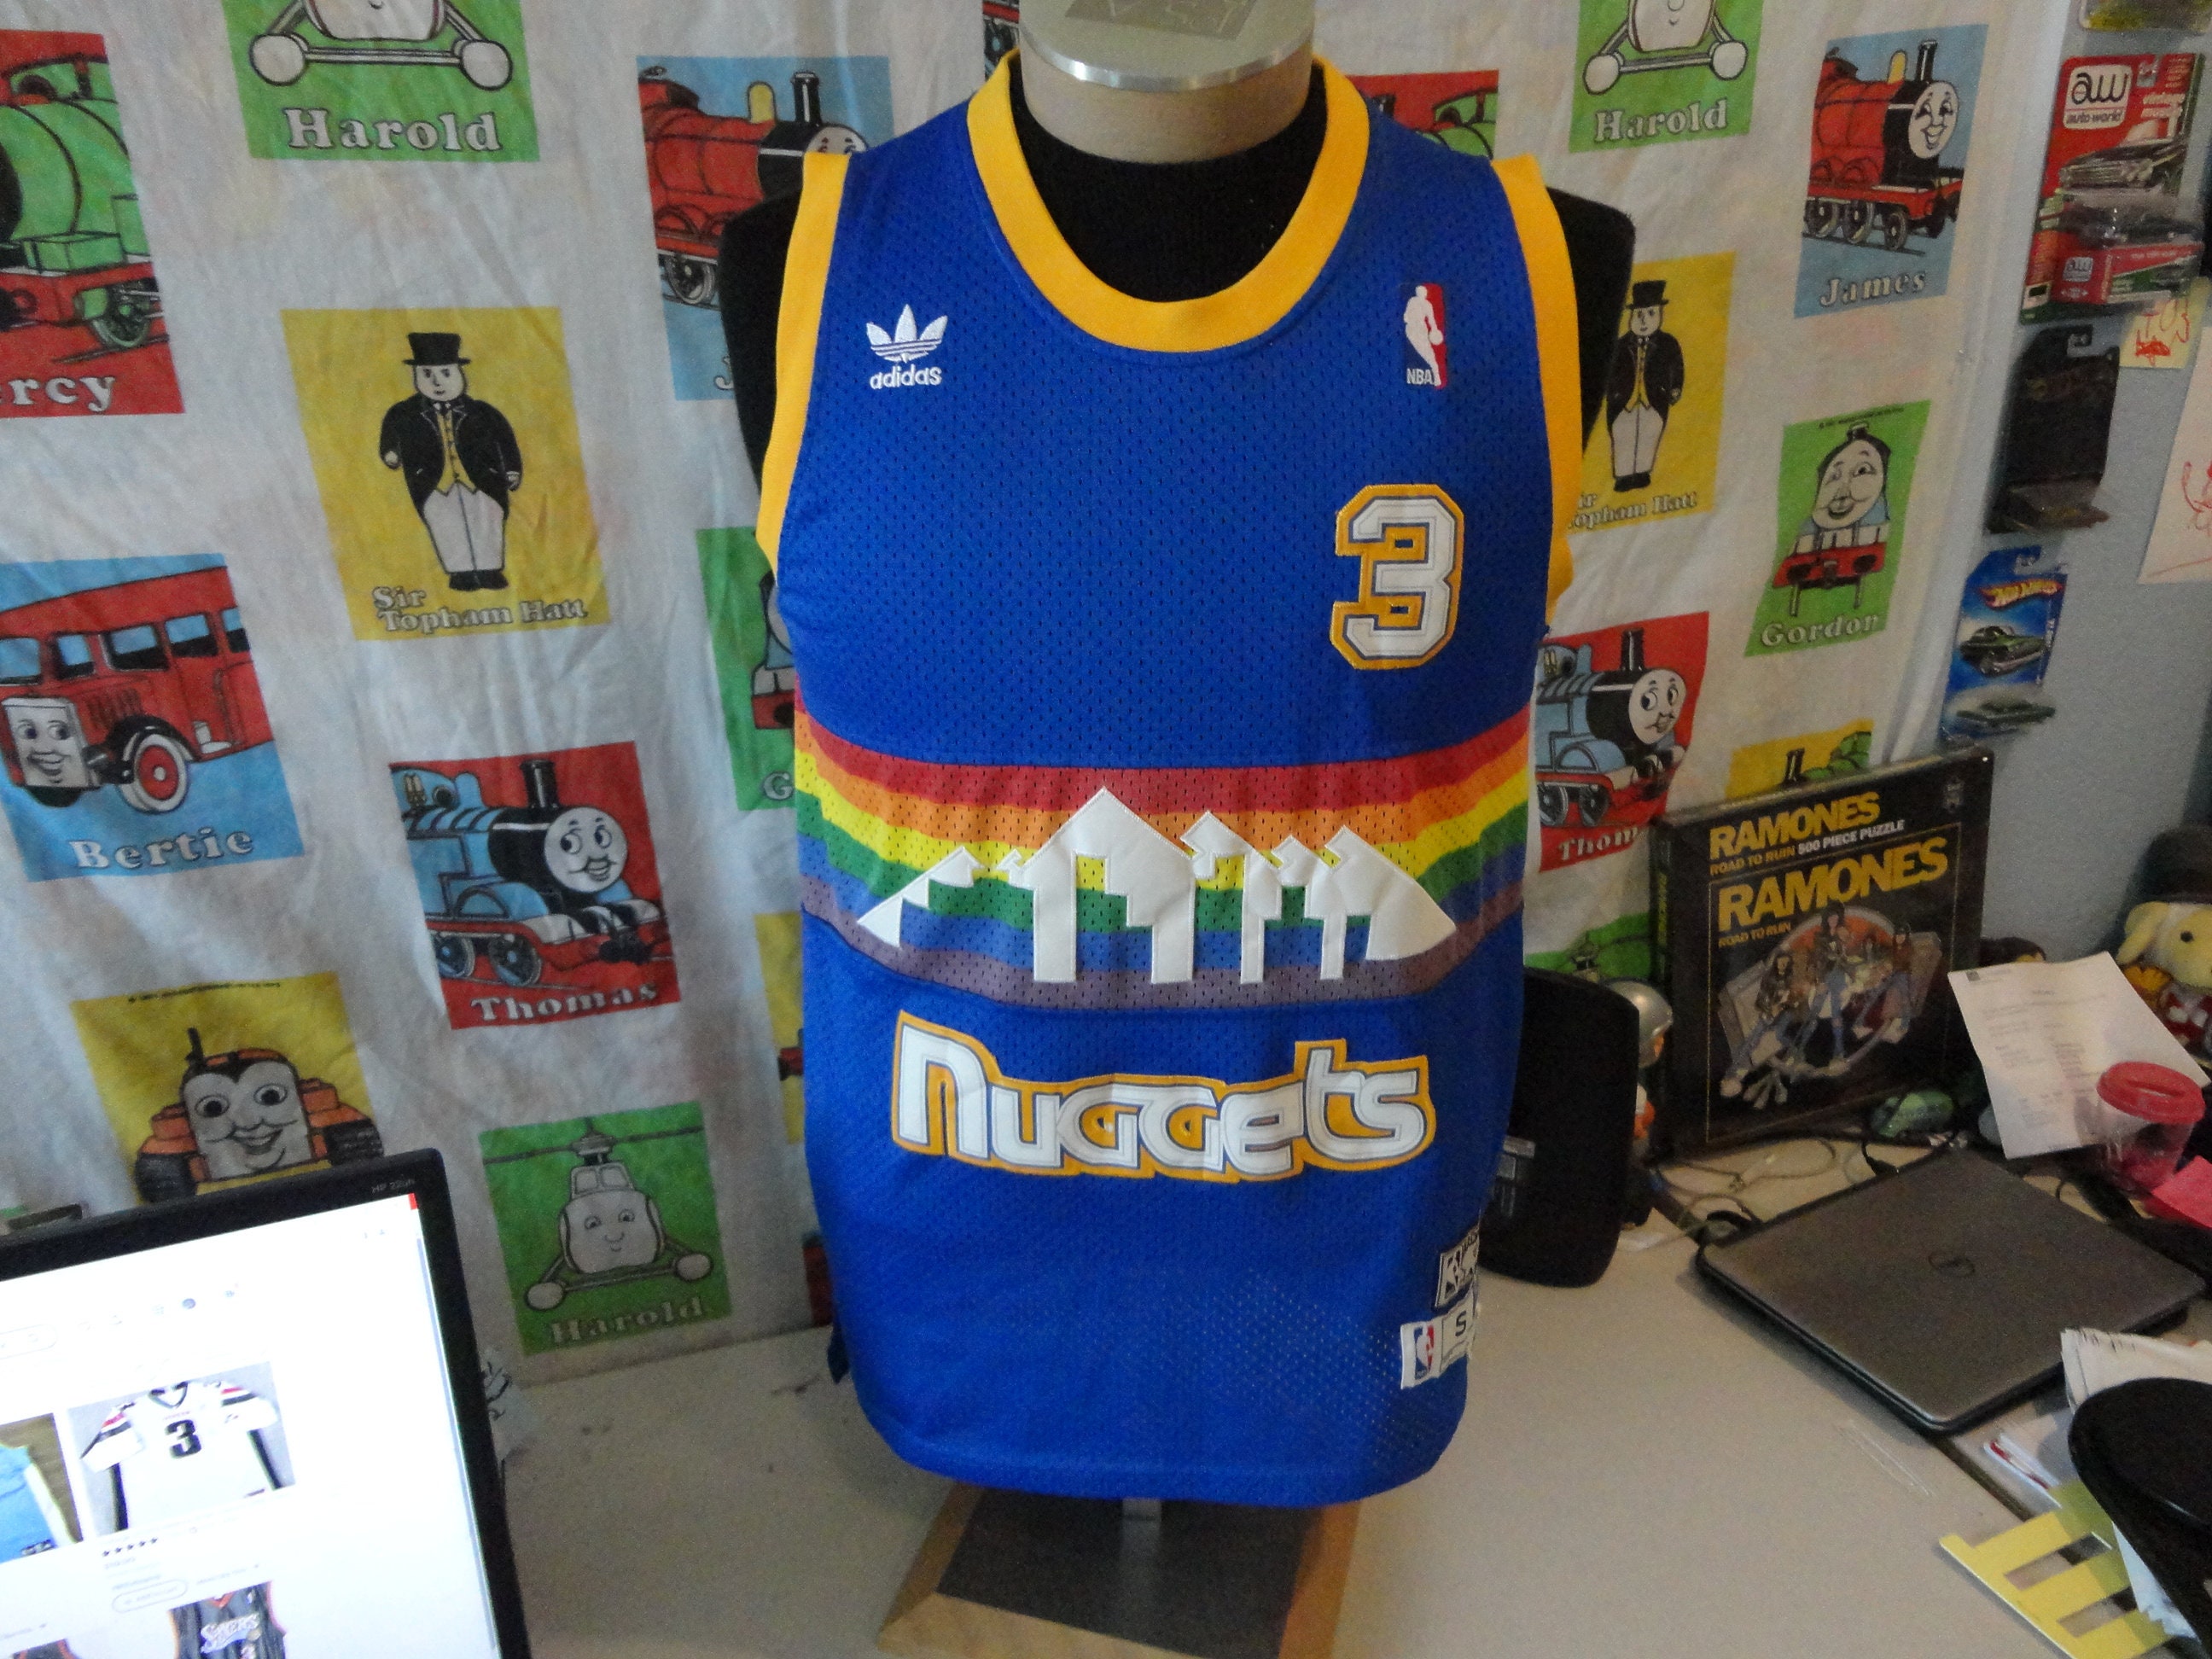 Vintage BABY YOUTH Denver Nuggets #15 Carmelo Anthony NBA Basketball Jersey  2T